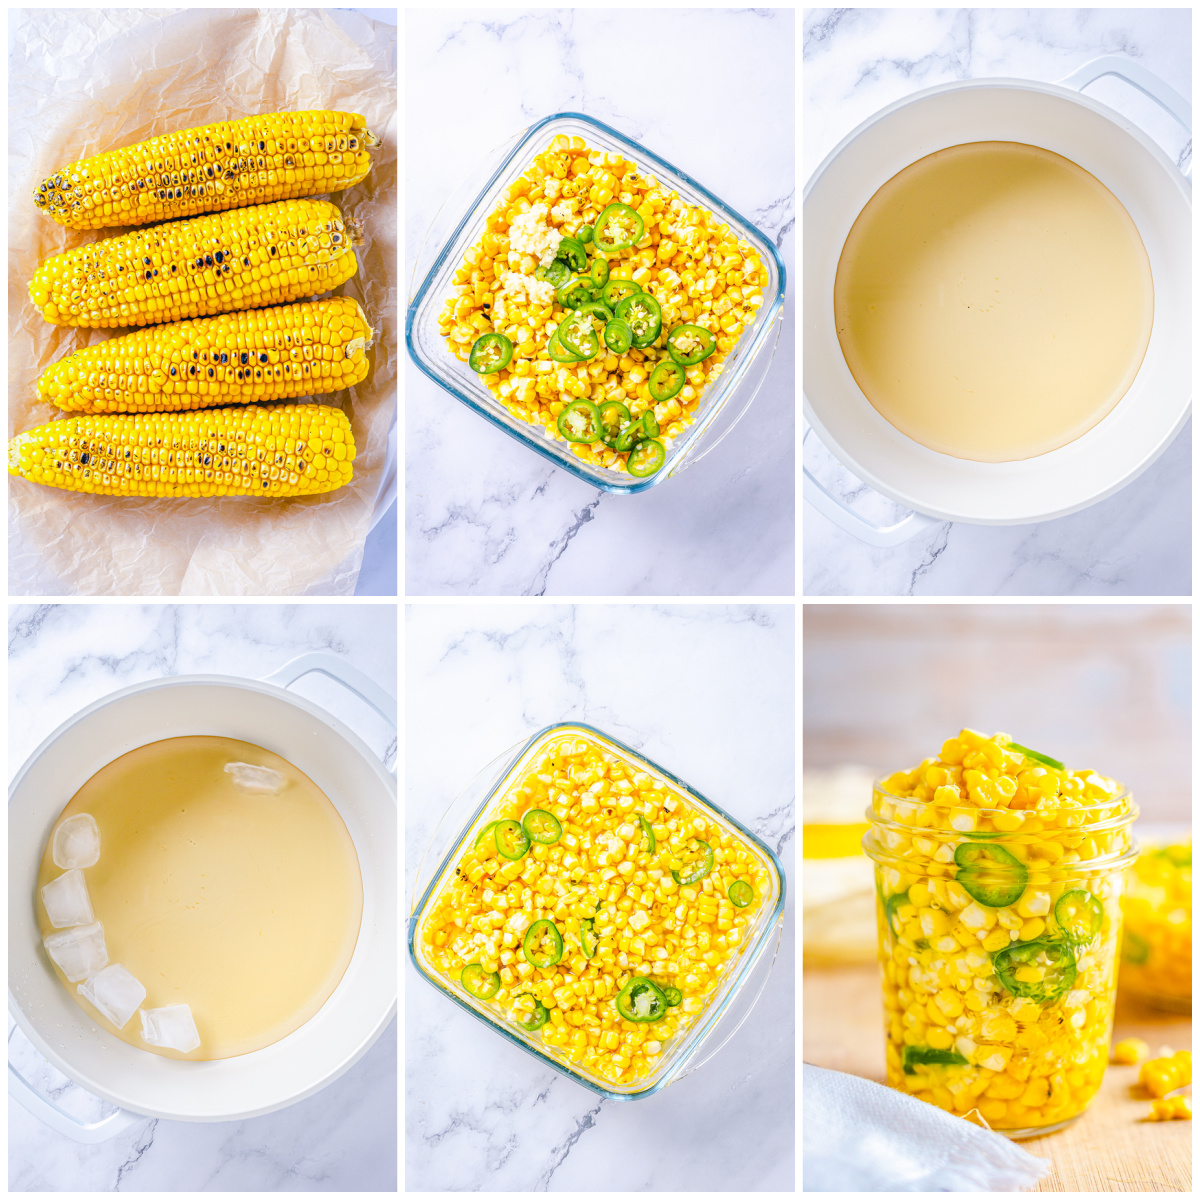 Step by step photos on how to make Corn Relish